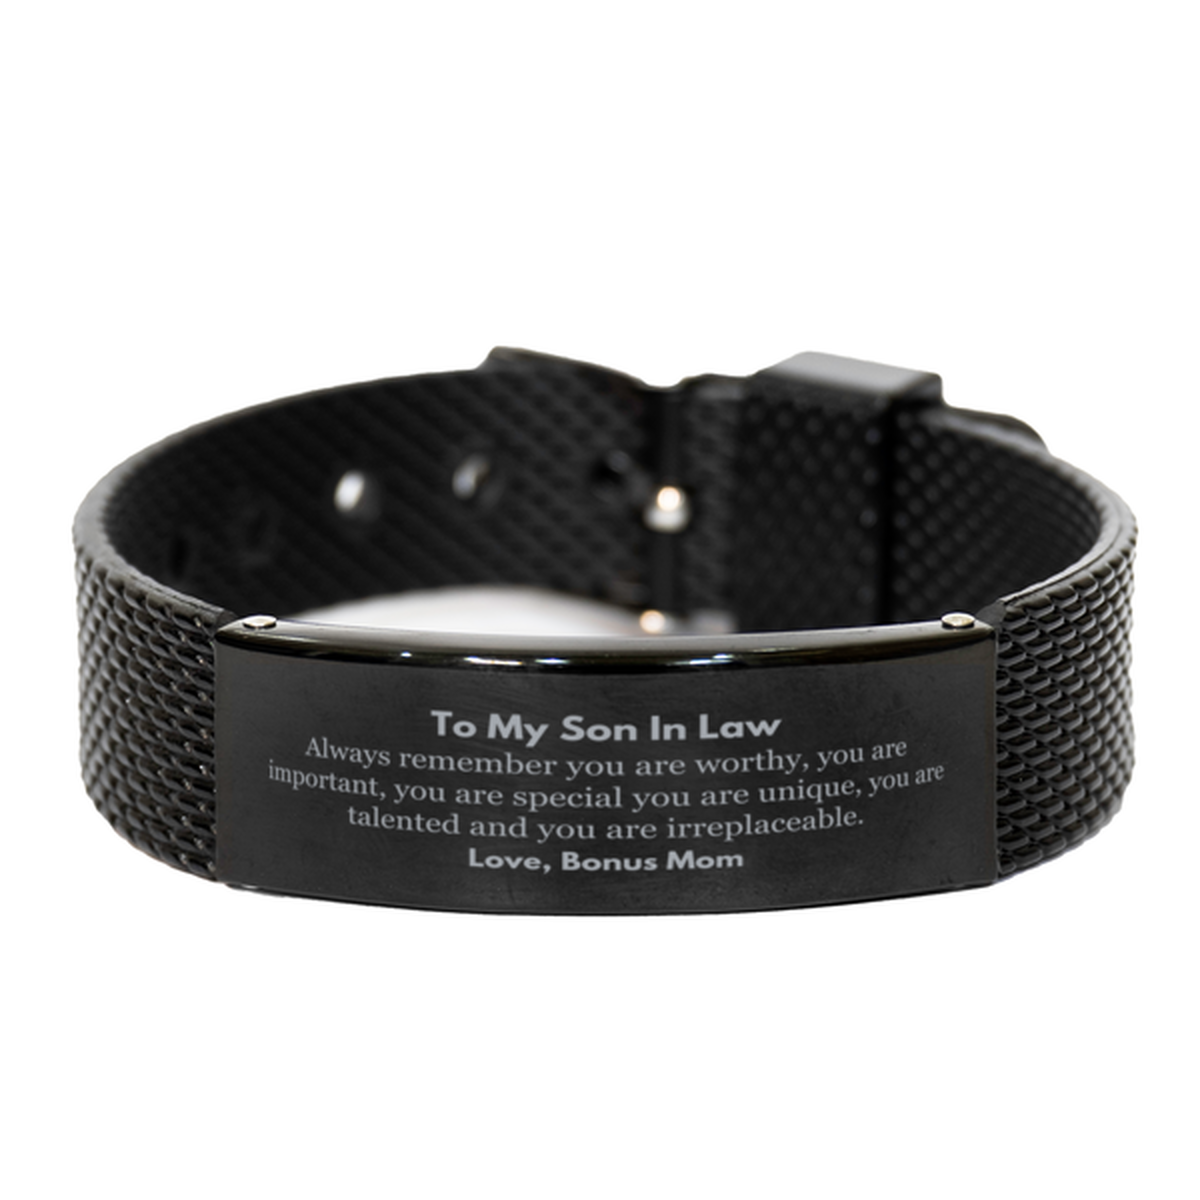 Son In Law Birthday Gifts from Bonus Mom, Inspirational Black Shark Mesh Bracelet for Son In Law Christmas Graduation Gifts for Son In Law Always remember you are worthy, you are important. Love, Bonus Mom